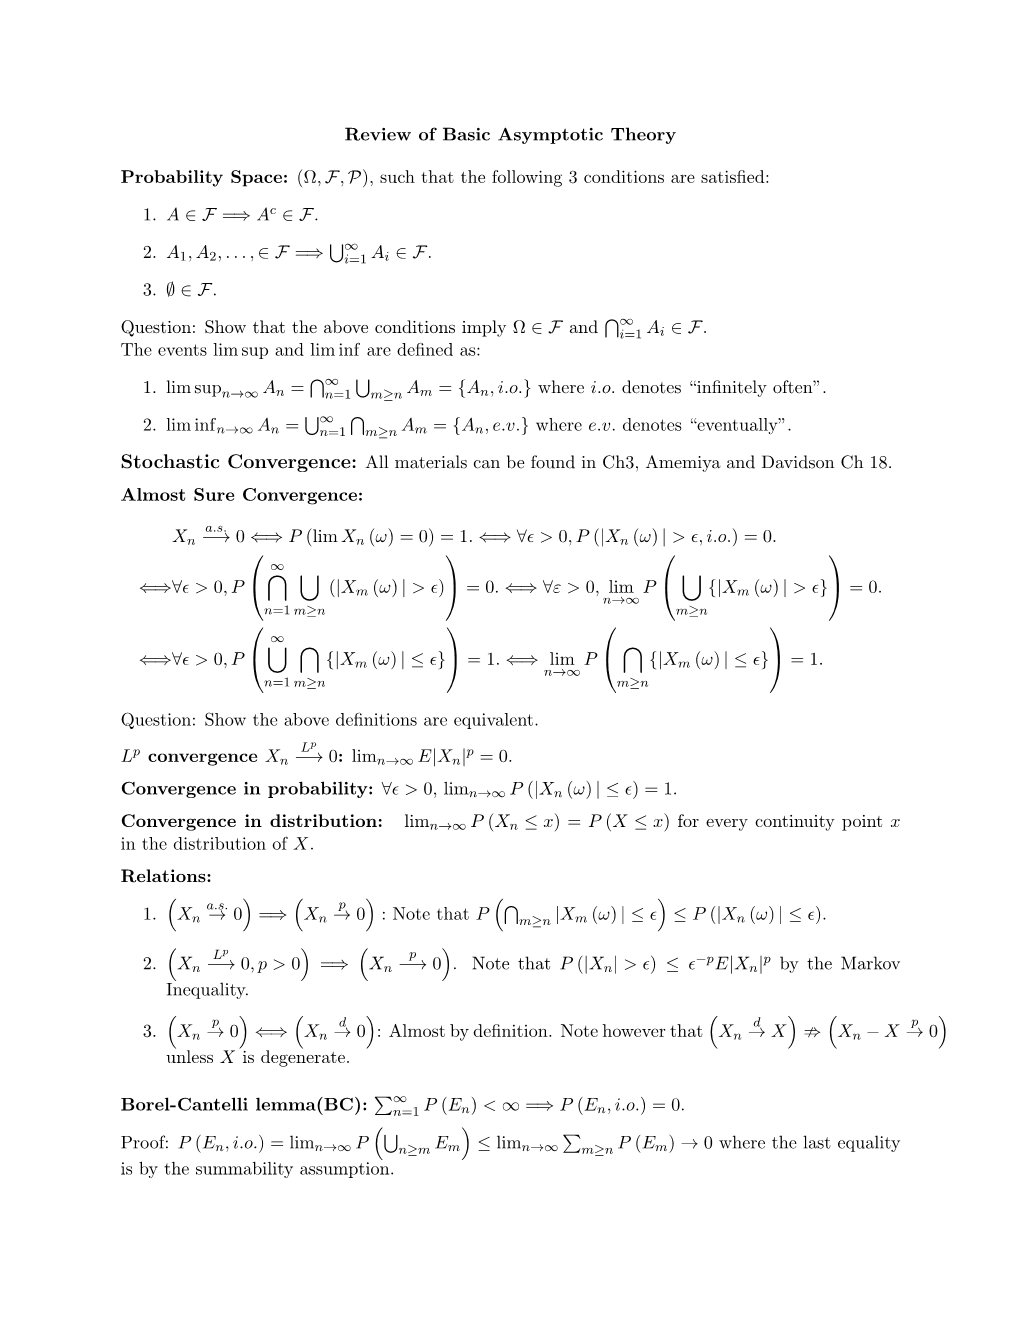 Review of Basic Asymptotic Theory Probability Space: (Ω,F,P)